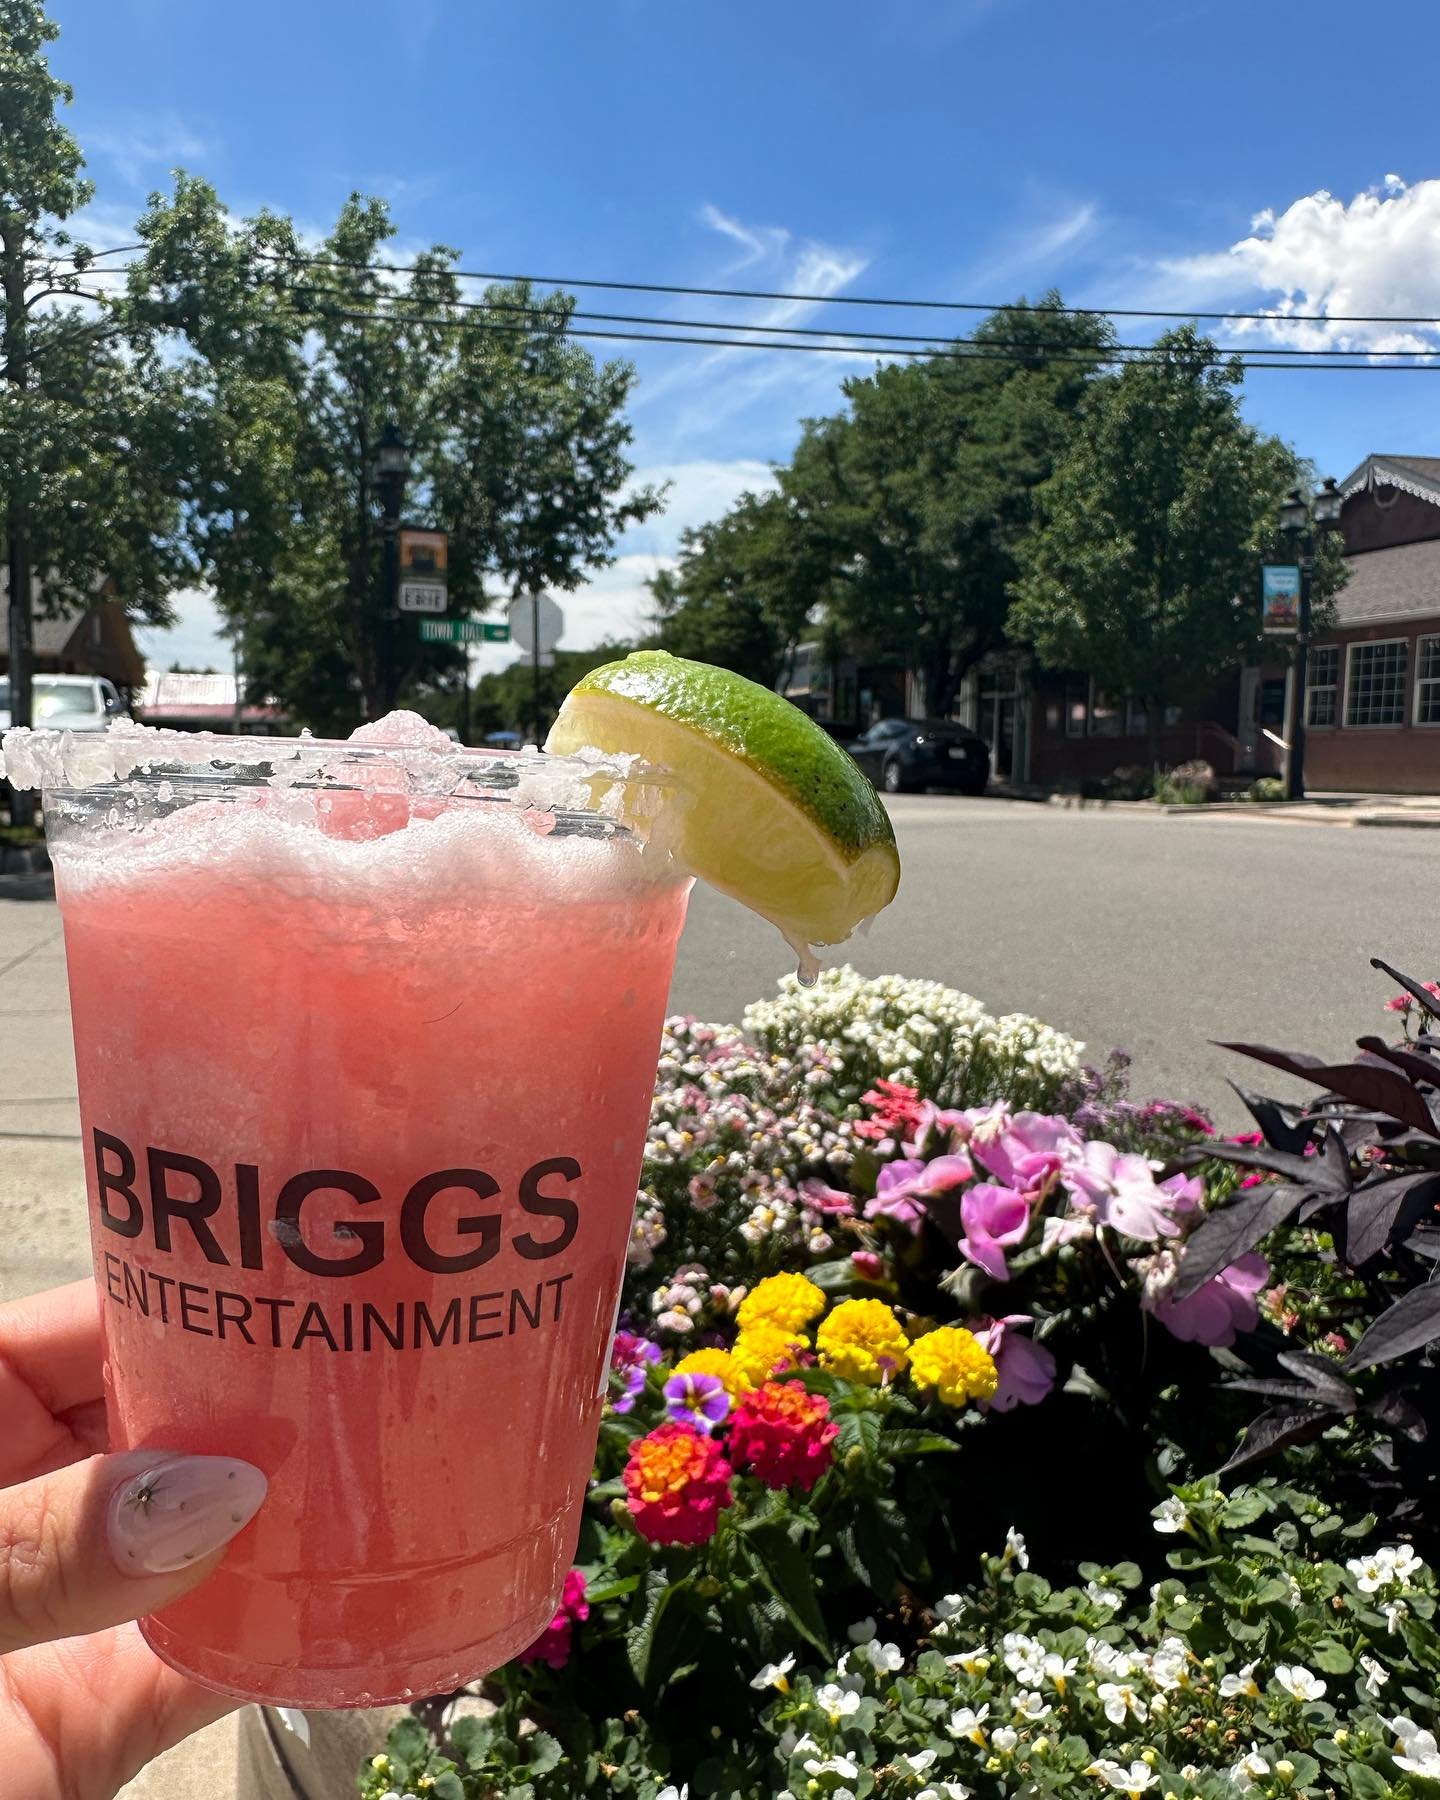 Happy Farmers Market! 
Just a reminder that parking will be very limited due to Briggs St. being closed. Please plan accordingly! Also, don't forget about your $5 Take-Out Margarita!